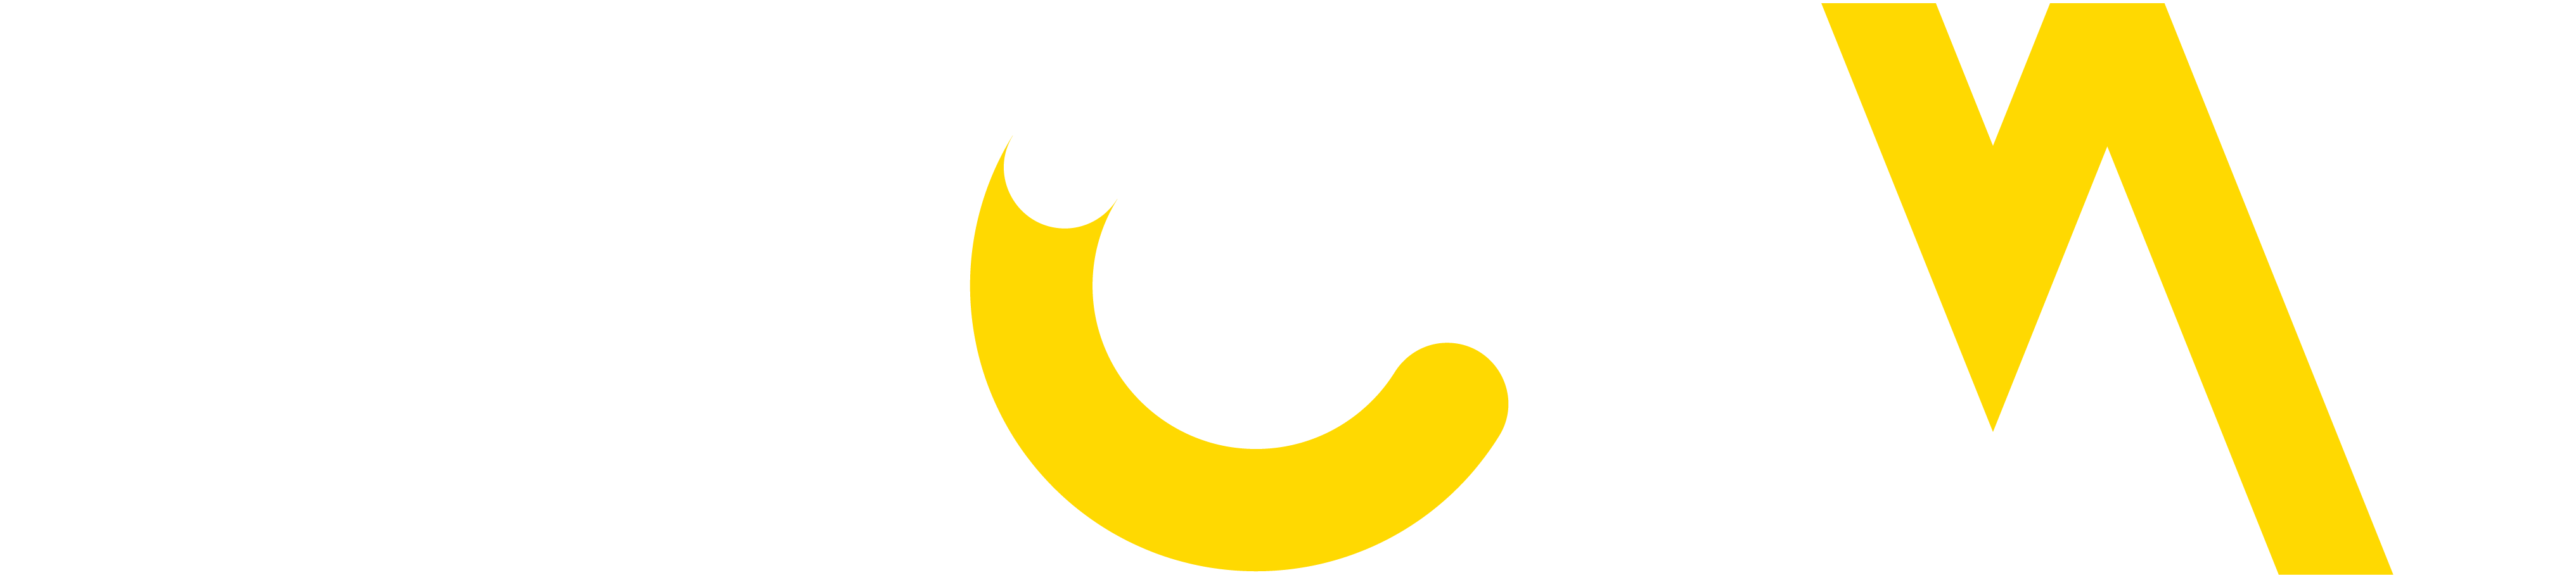 flow company logo white and yellow